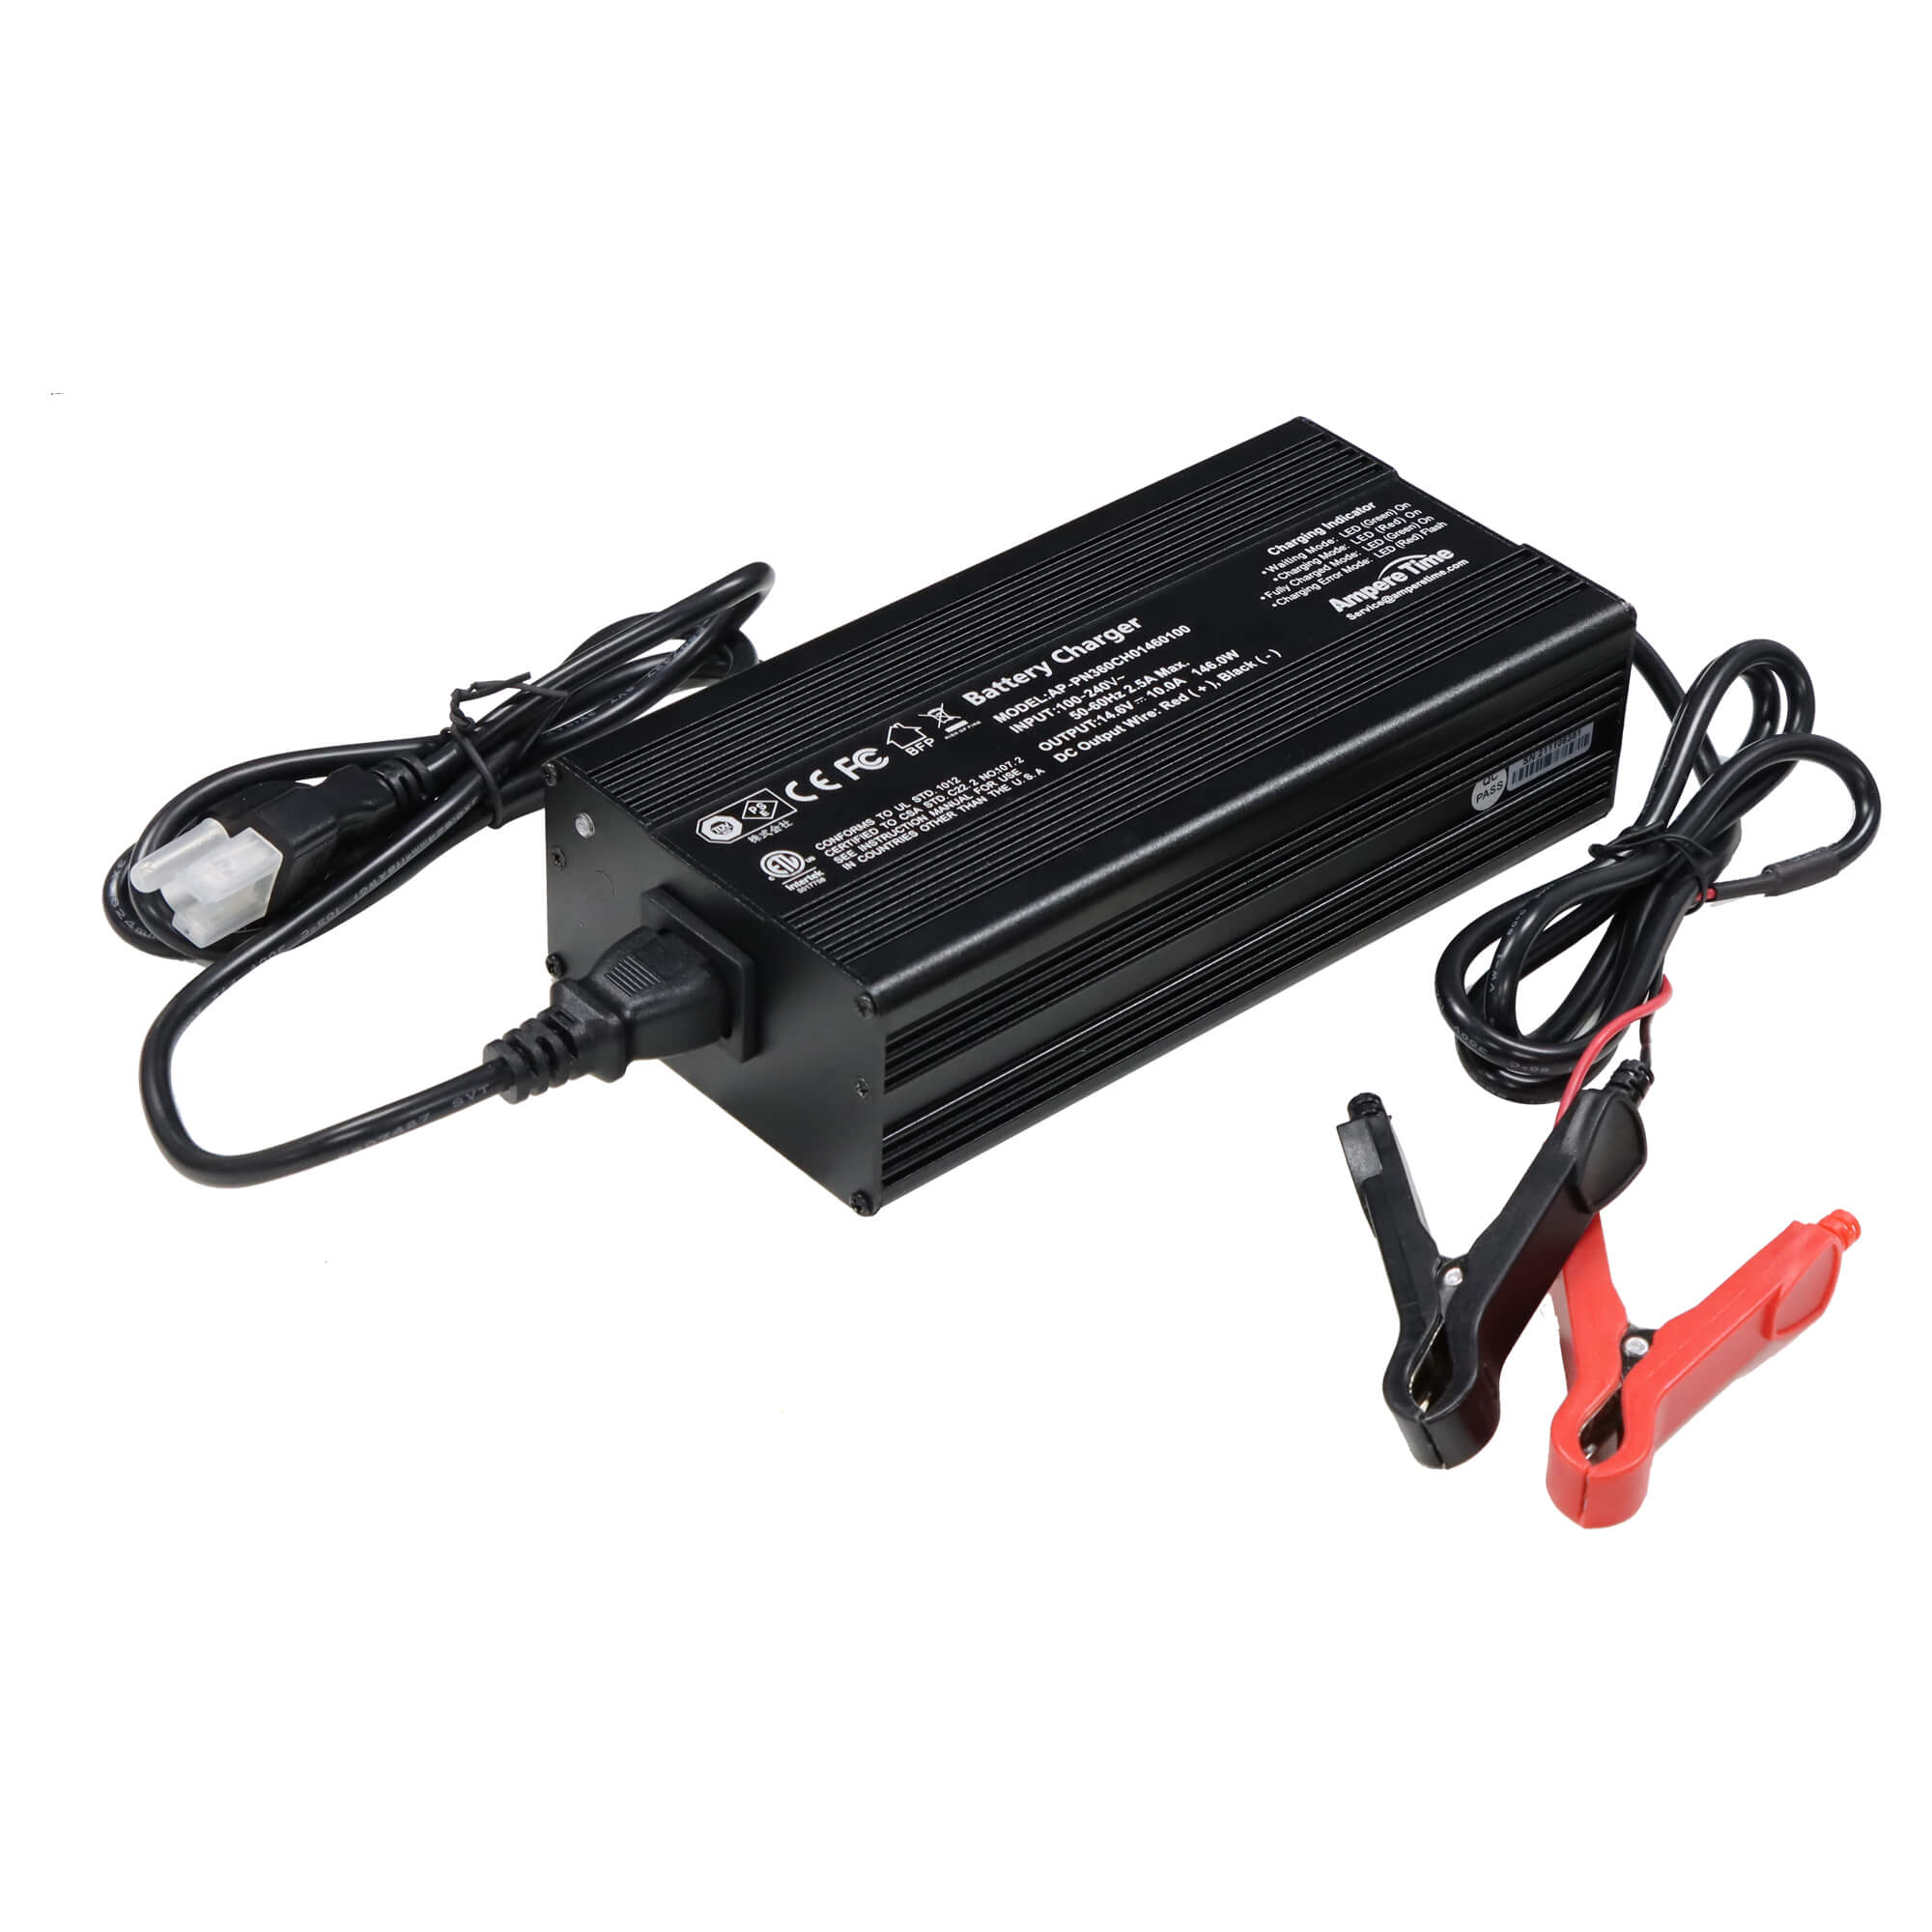 Ampere Time 14.6V 10A, Intelligent AC-DC Battery Charger Ampere Time